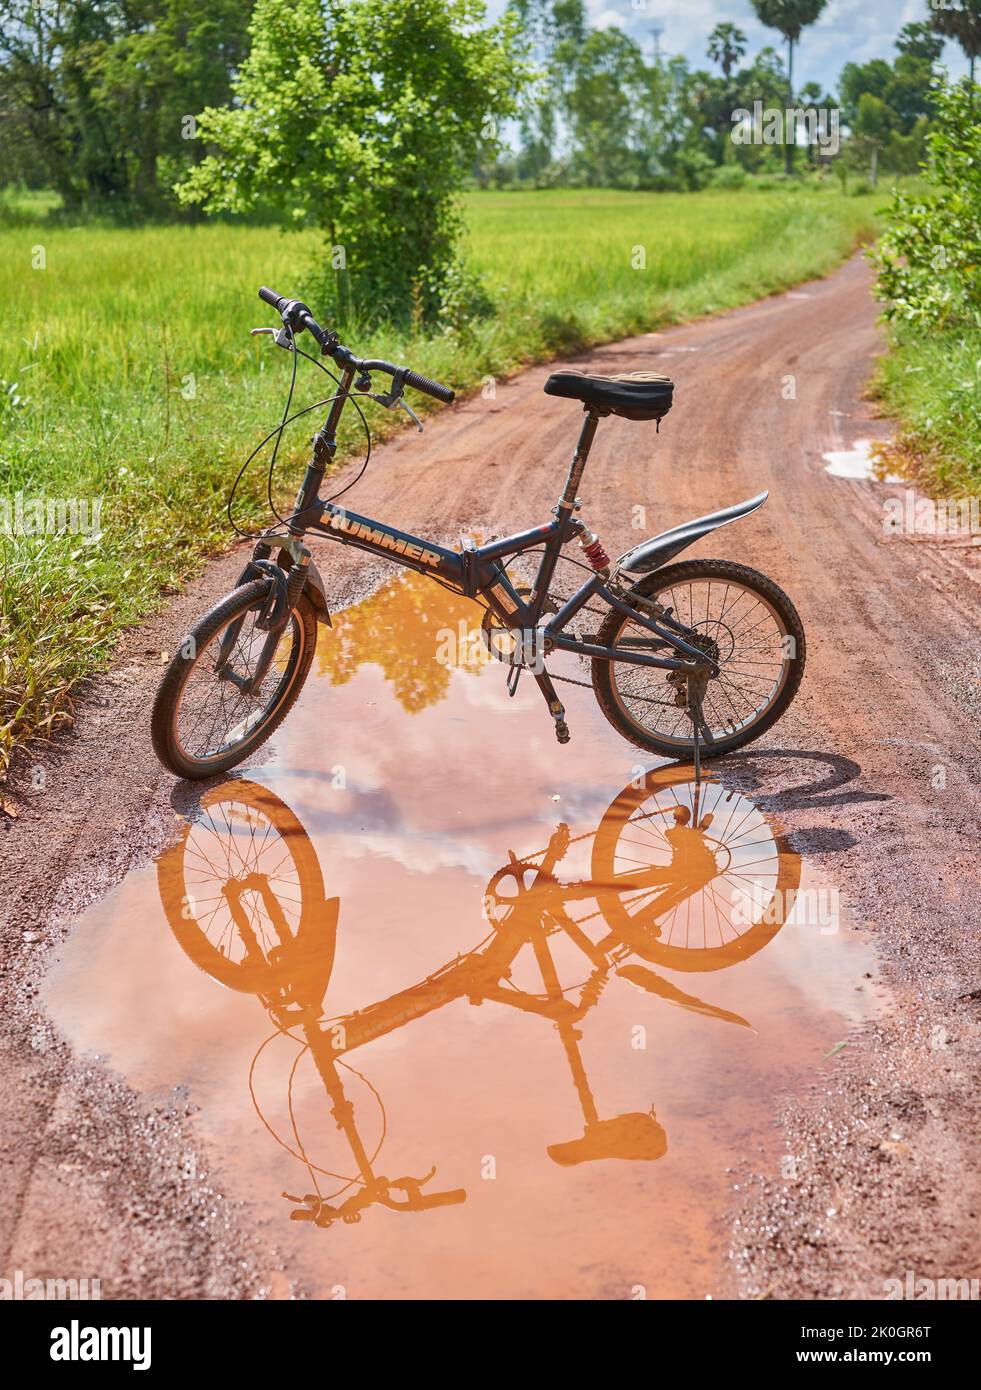 A mountain bicycle and reflection in a puddle of water on a country road. Stock Photo